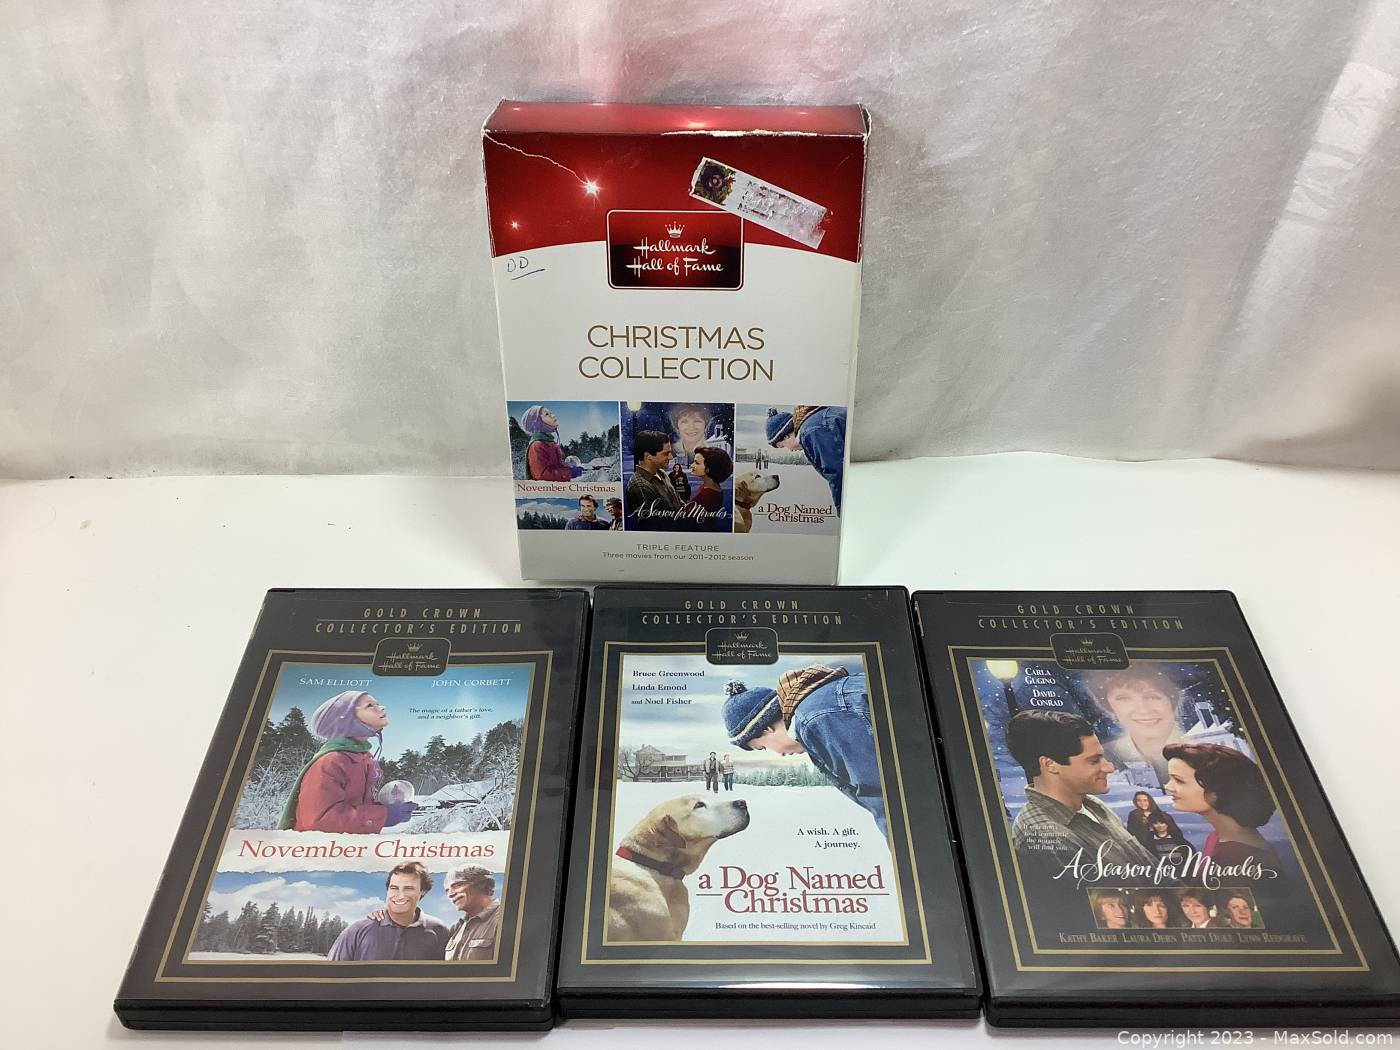 https://d12srav5gxm0re.cloudfront.net/auctionimages/88196/1702235494/wspecial_edition_hallmark_hall_of_fame_movies_christmas_collection_1_dvd_set_of_3_a_dog_named_christmas_november_christmas_and_a_season_for_miracles-56-1.jpeg